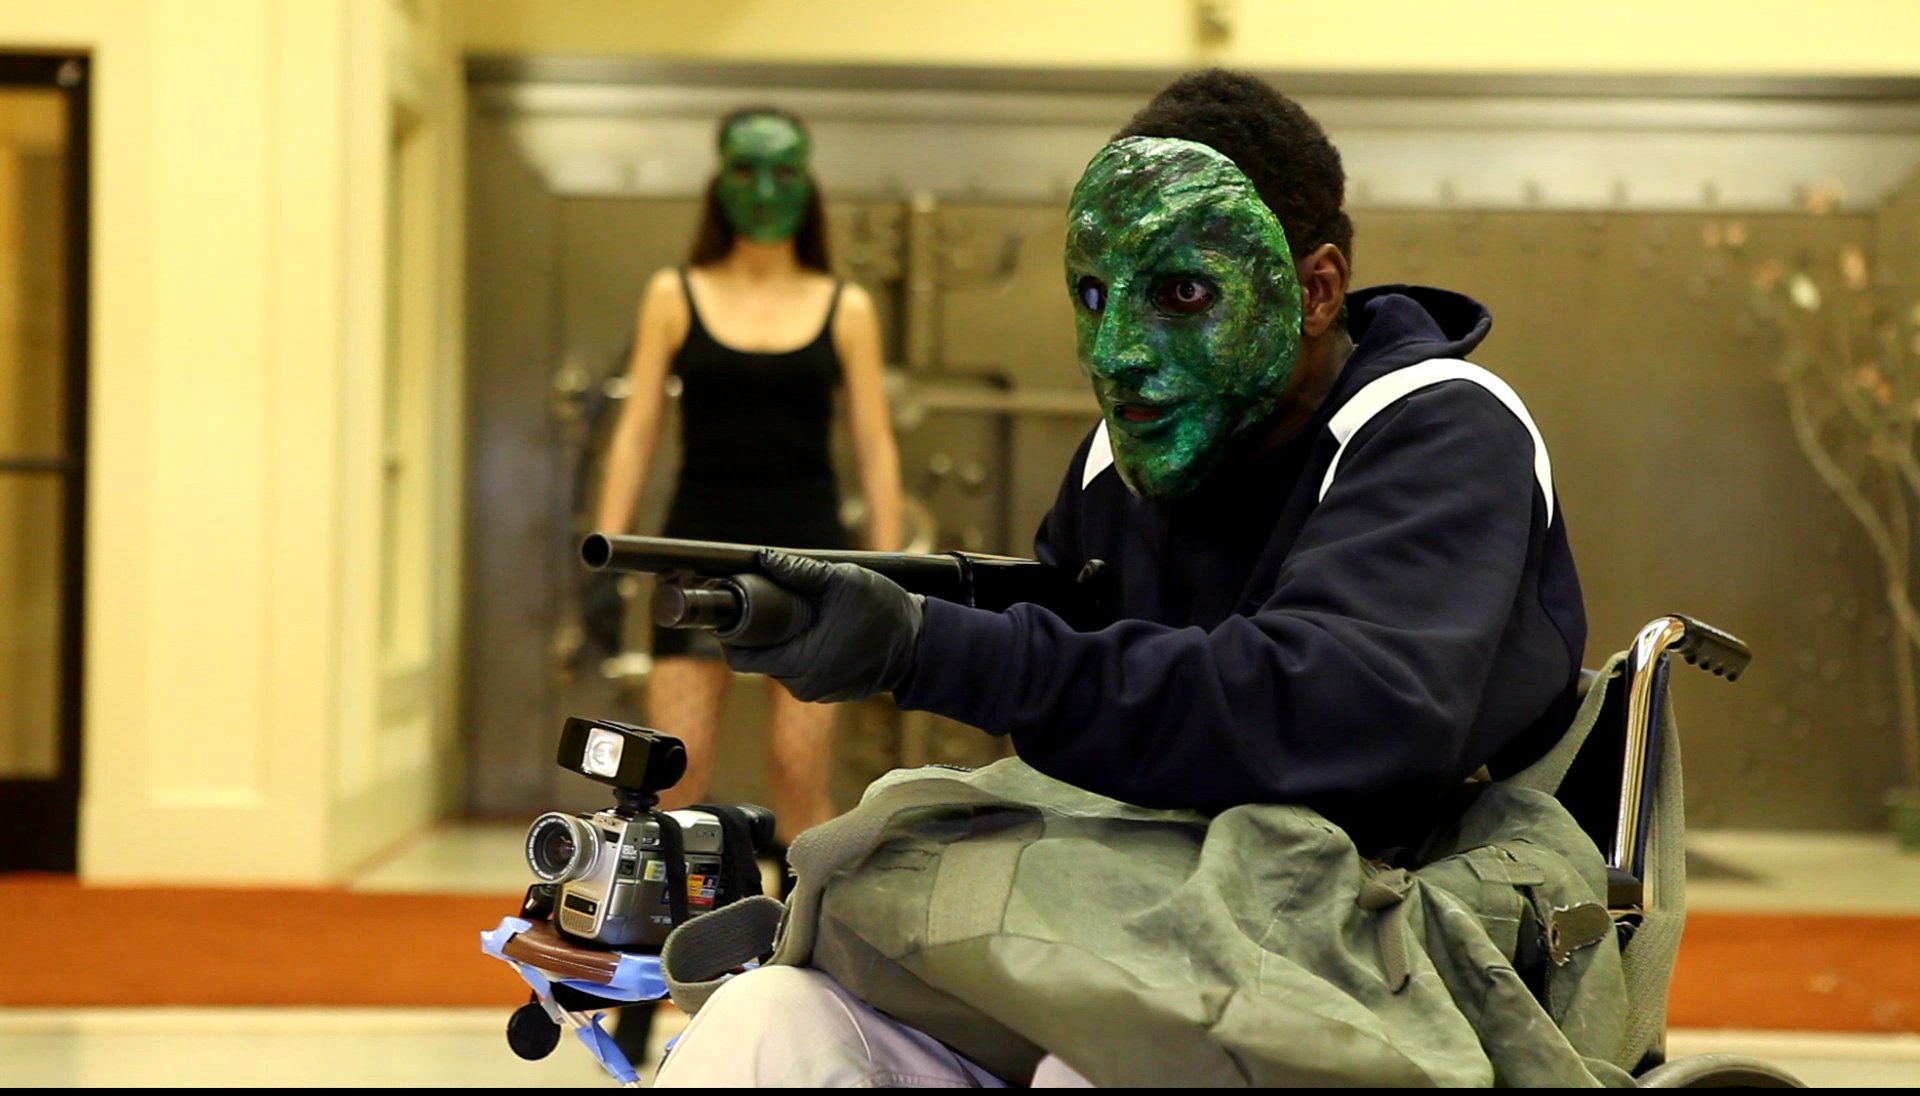 Green Bandits, on location during the bank robbery scene. Gift and Gina take control.